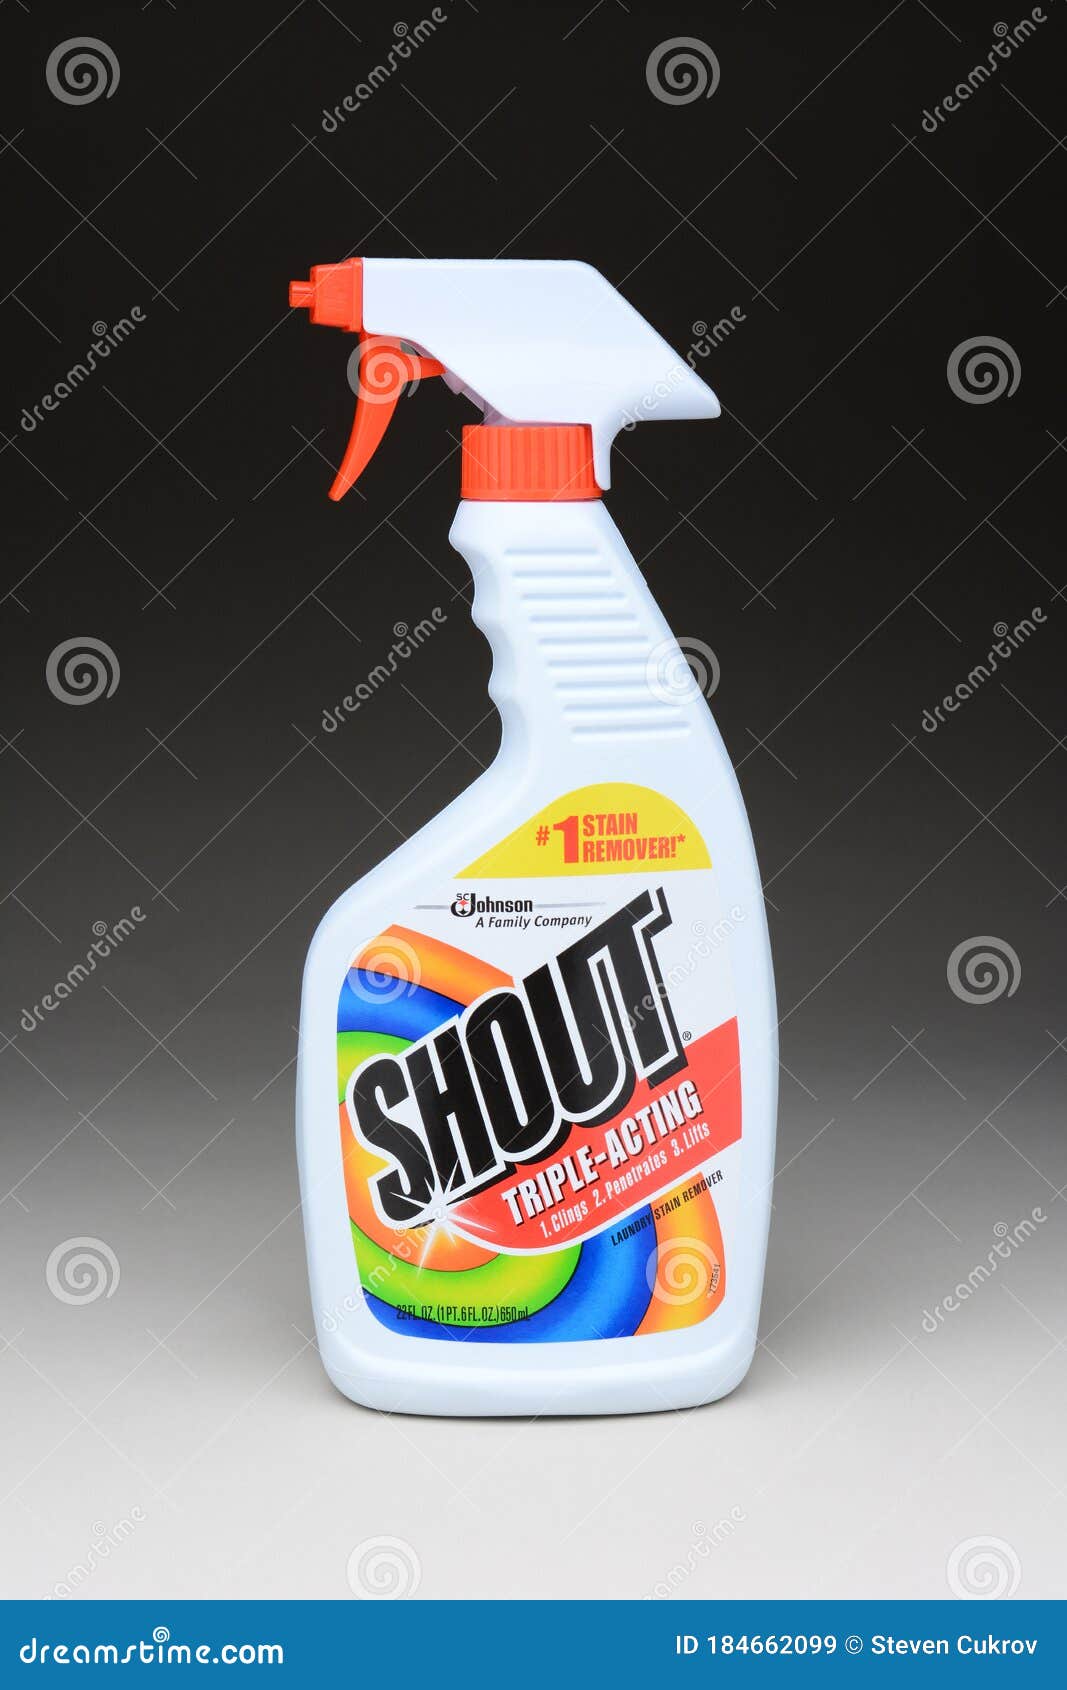 https://thumbs.dreamstime.com/z/shout-laundry-stain-remover-irvine-ca-january-oz-bottle-products-designed-to-help-remove-stains-clothing-184662099.jpg